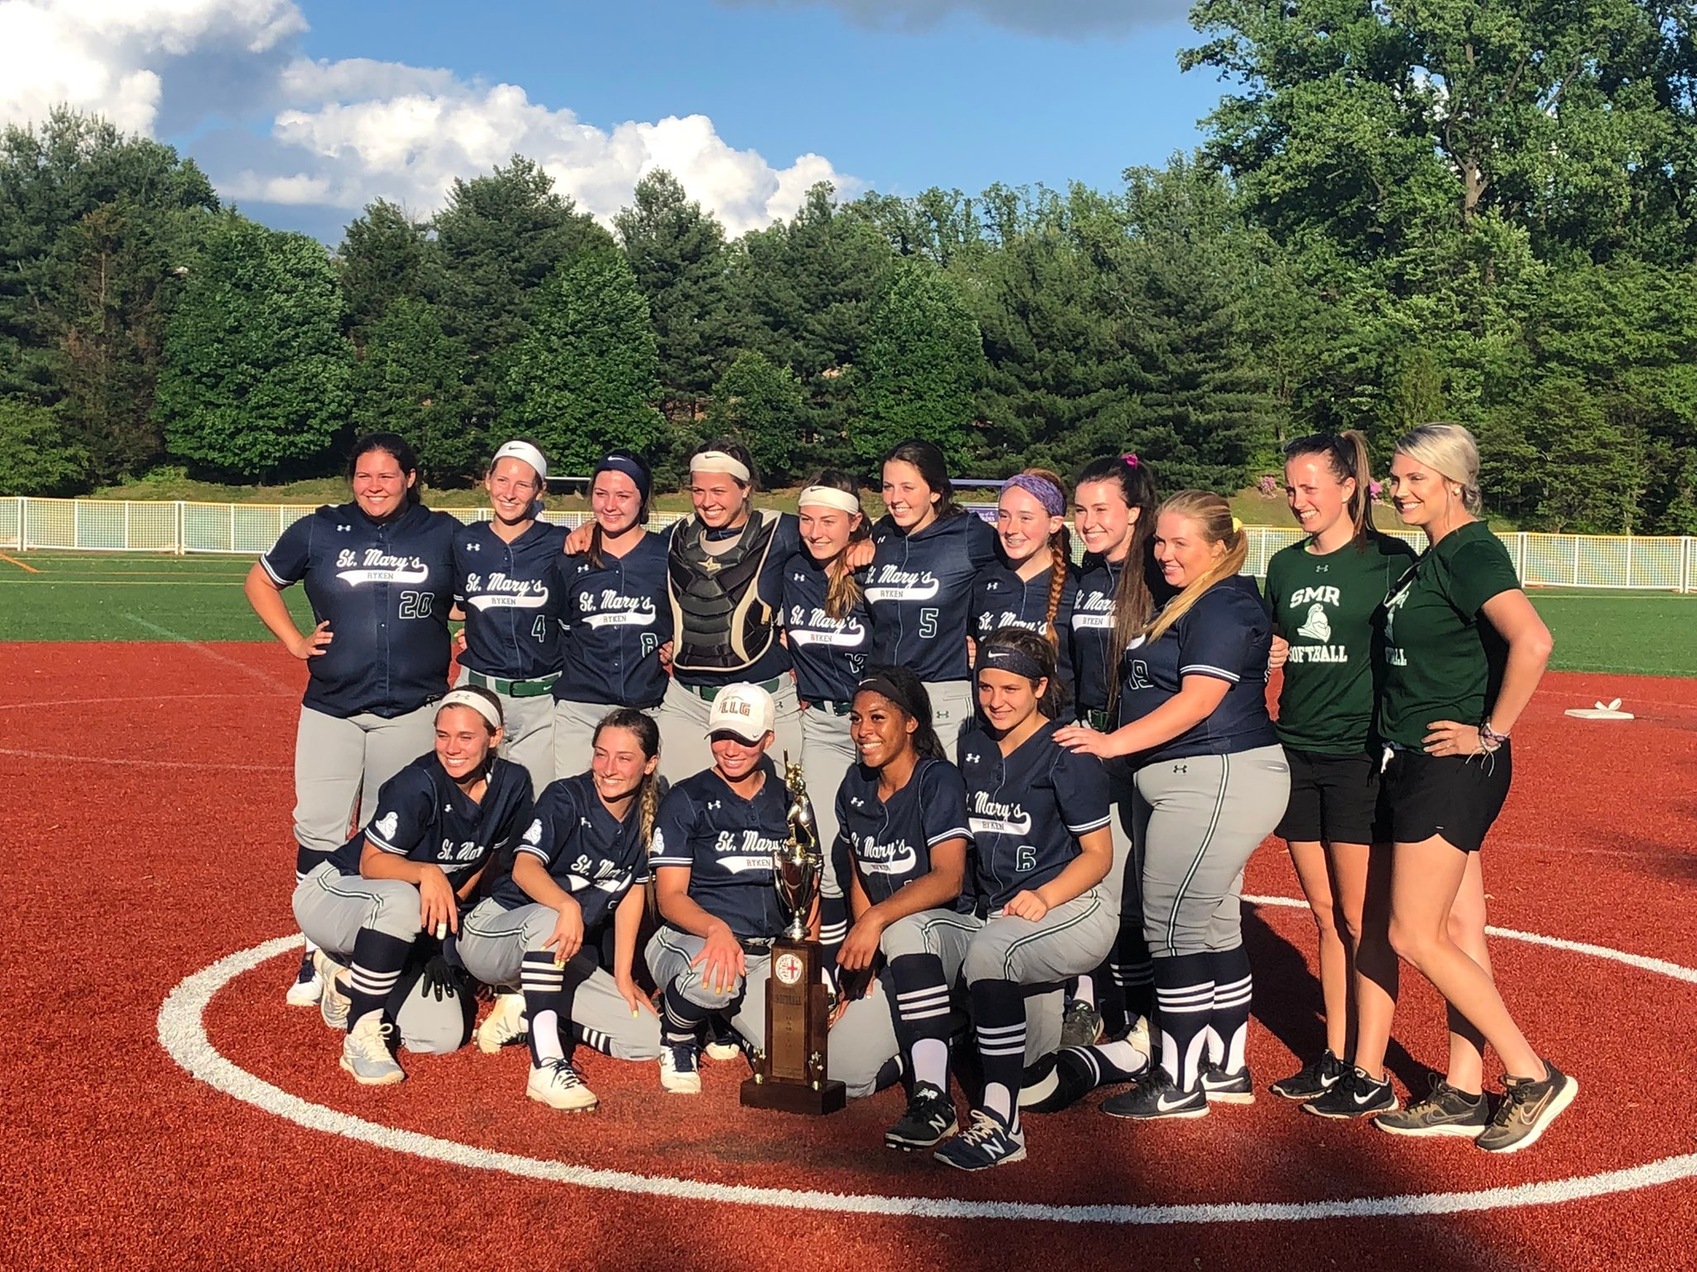 St. Mary's Ryken wins the WCAC Softball Championship in extra innings for their first title since 2015.